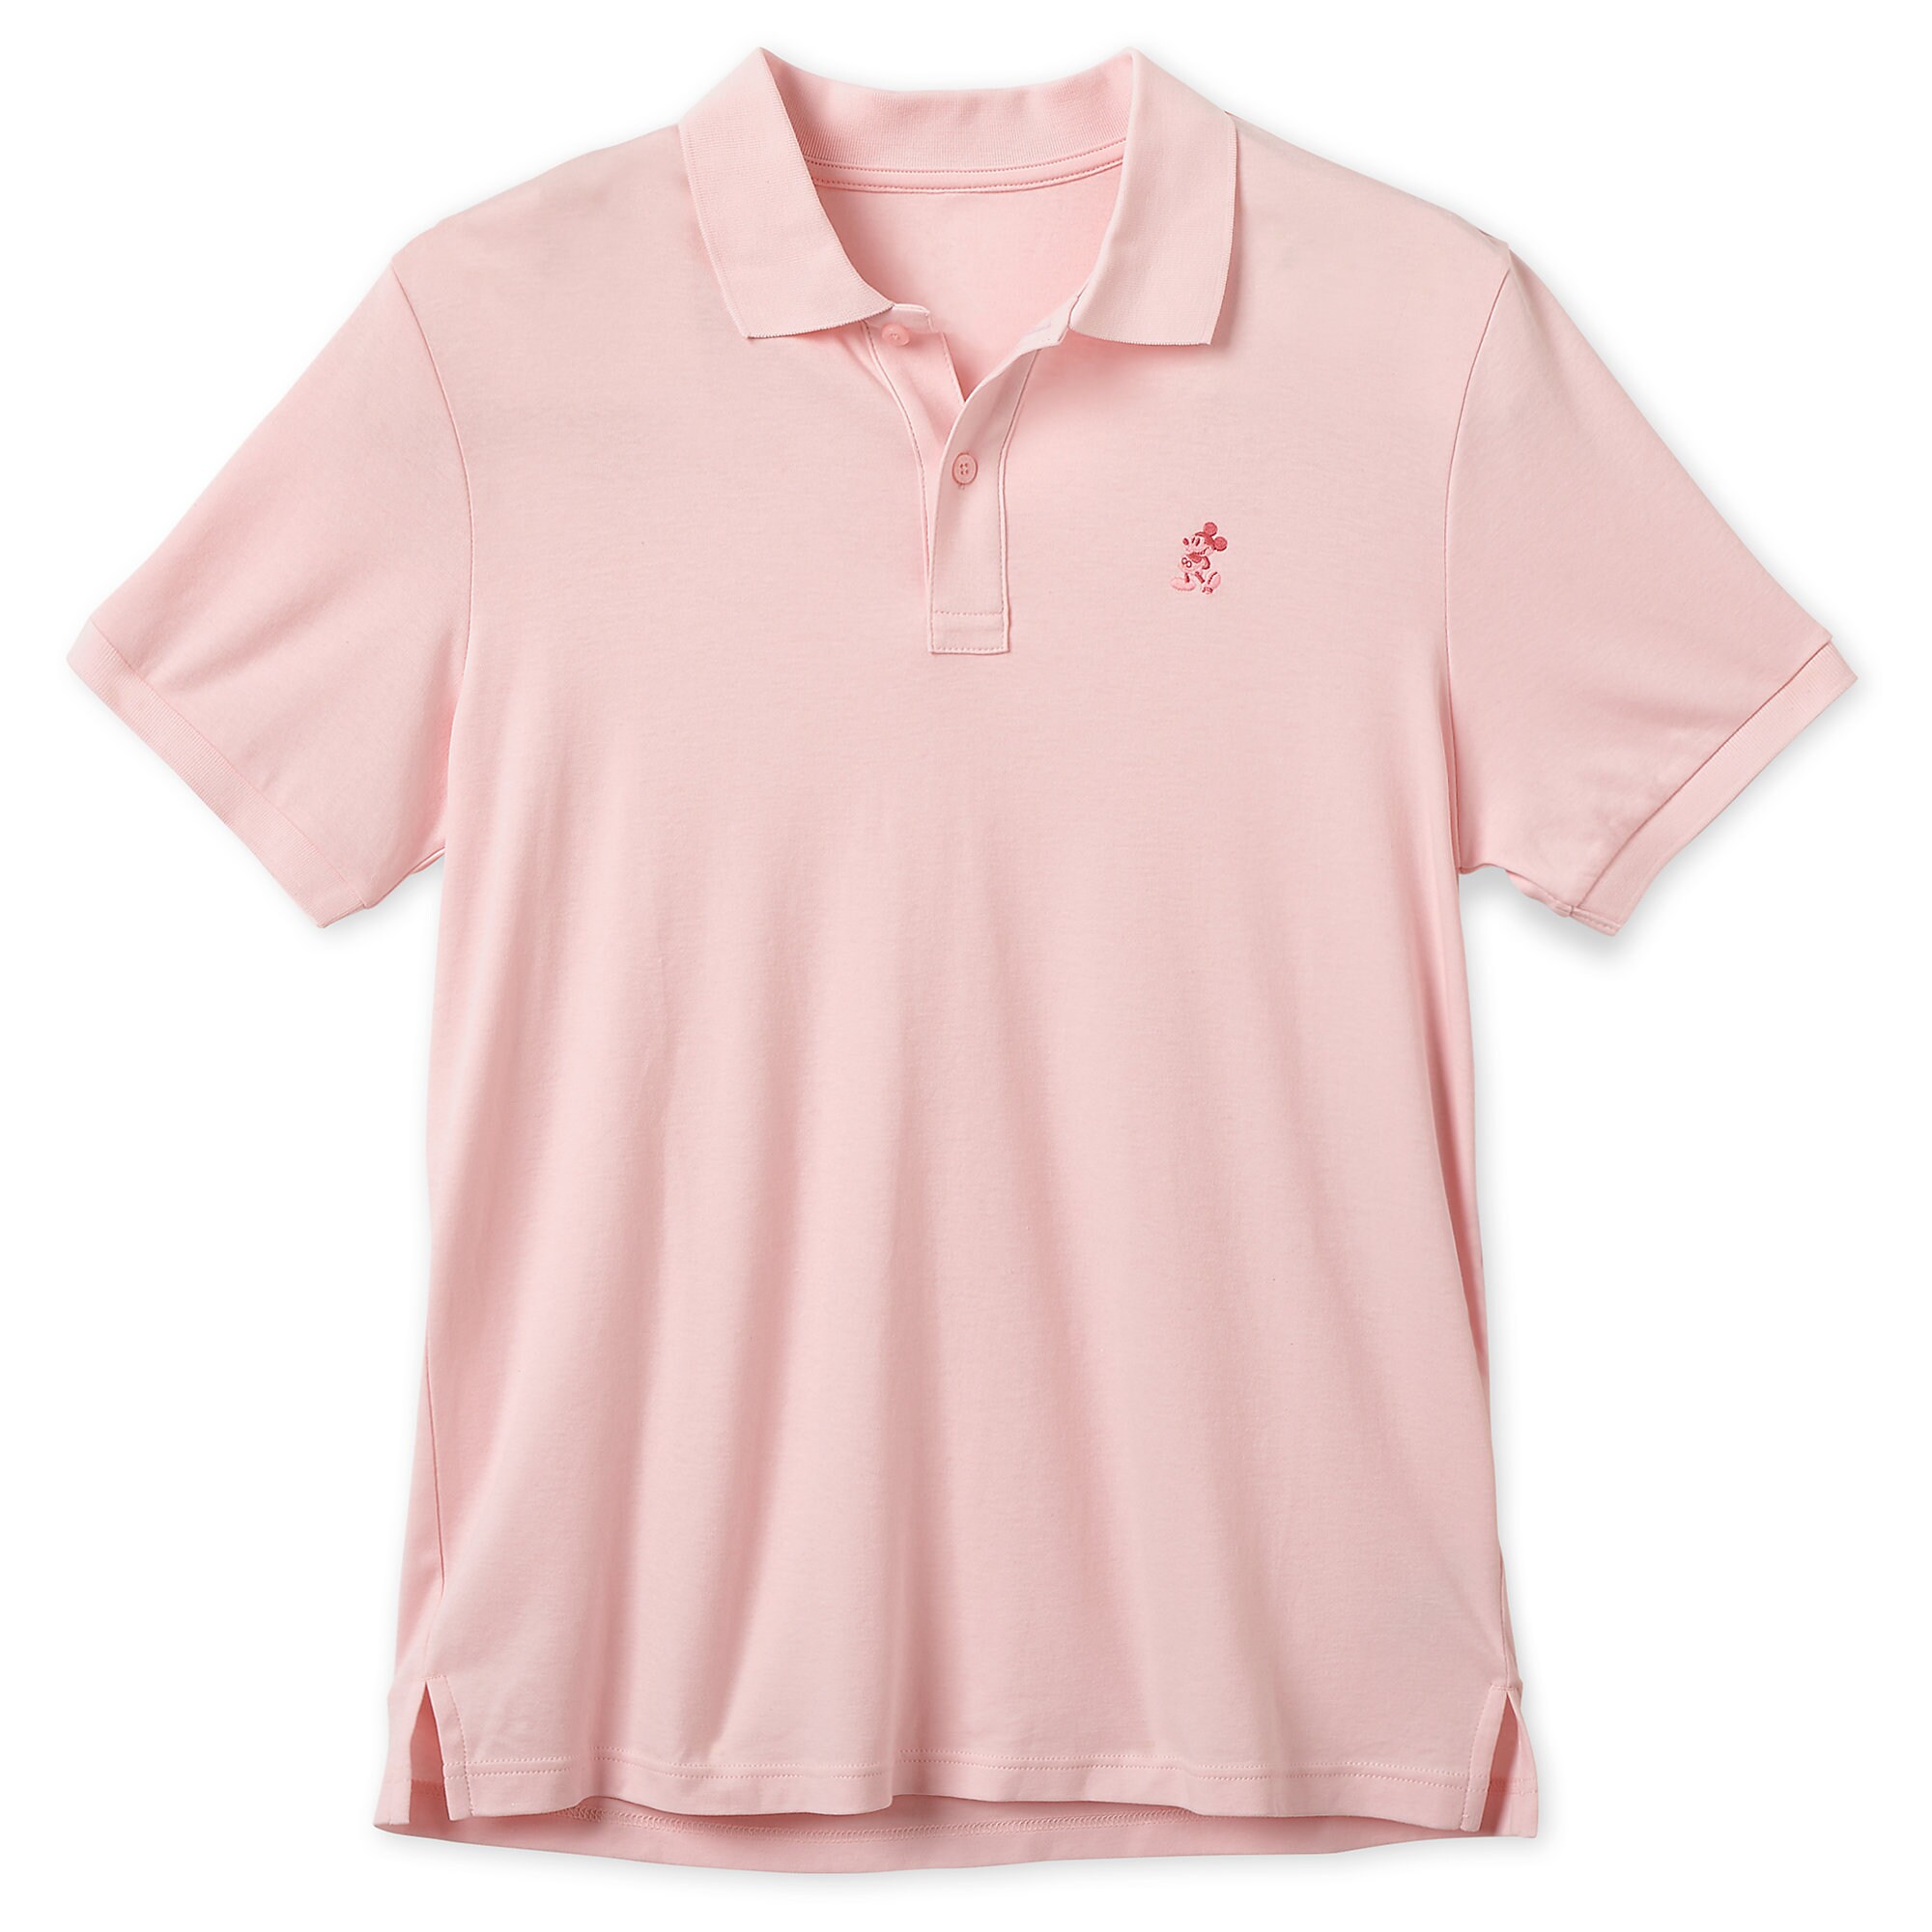 Mickey Mouse Pima Cotton Polo Shirt for Men - Pink